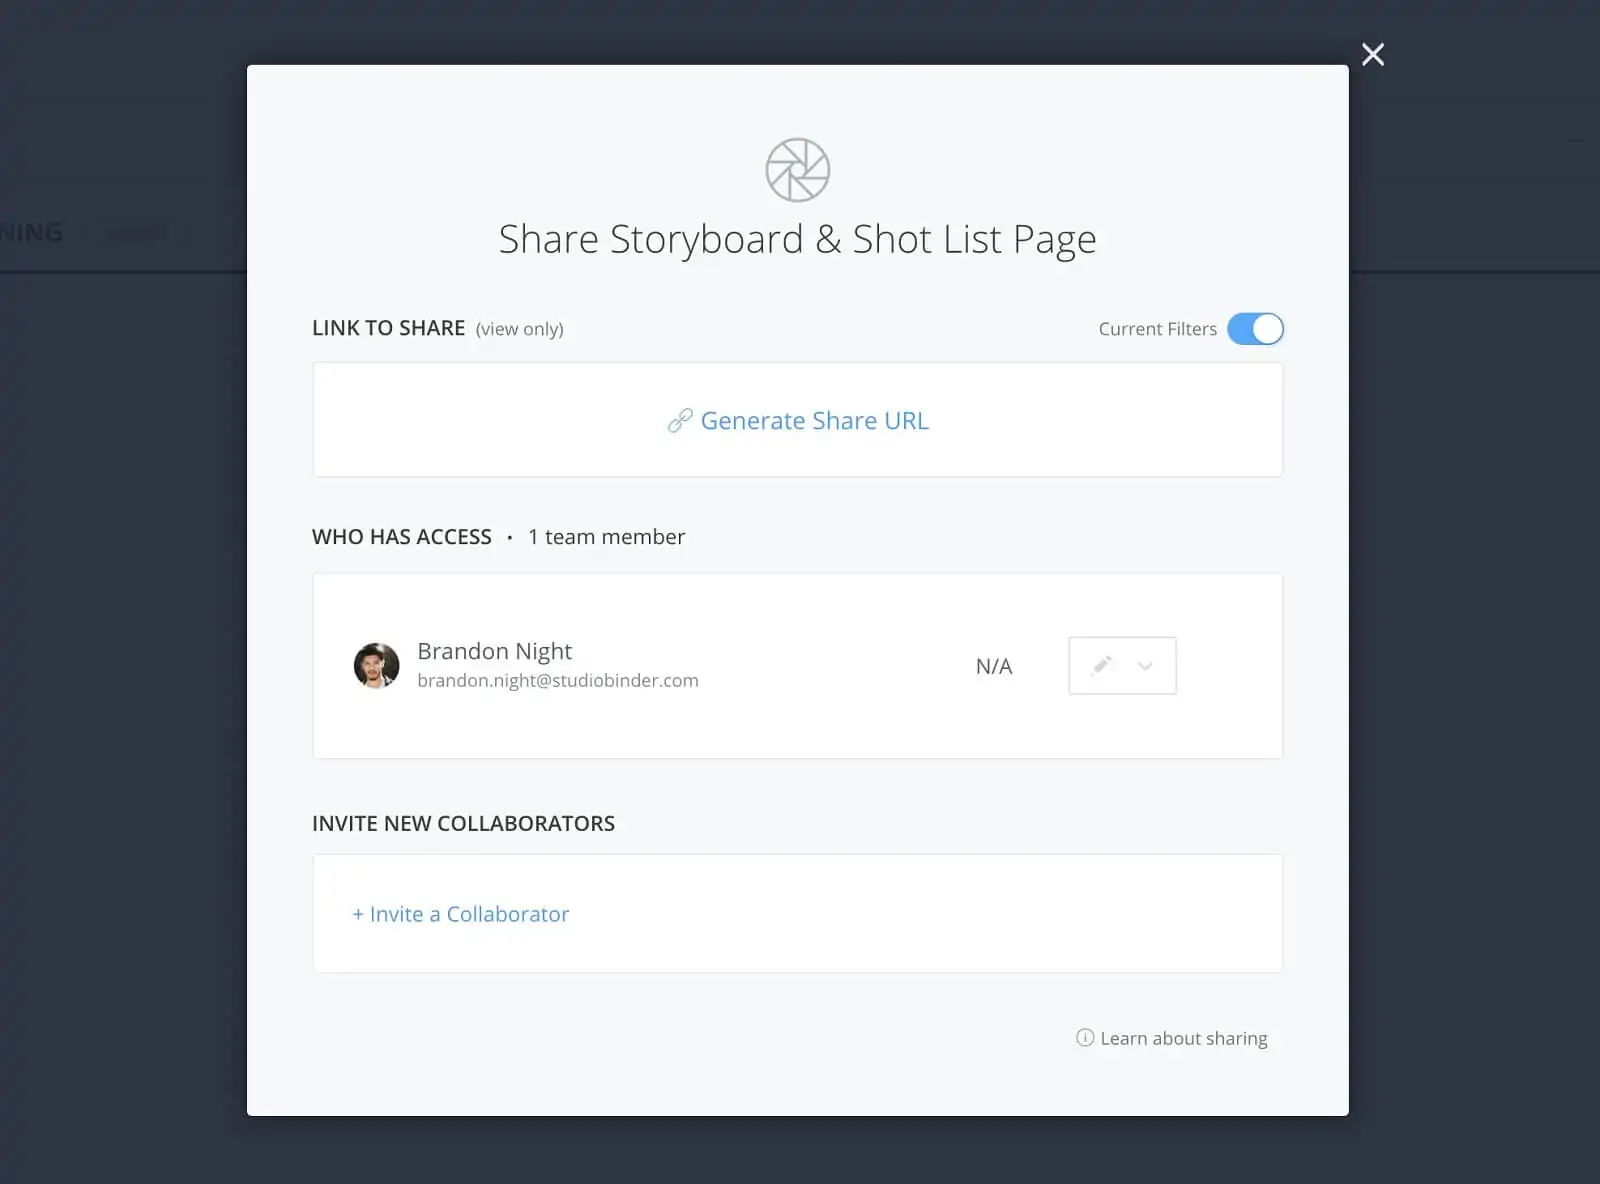 Shot lists & storyboards share page - Click invite collaborator